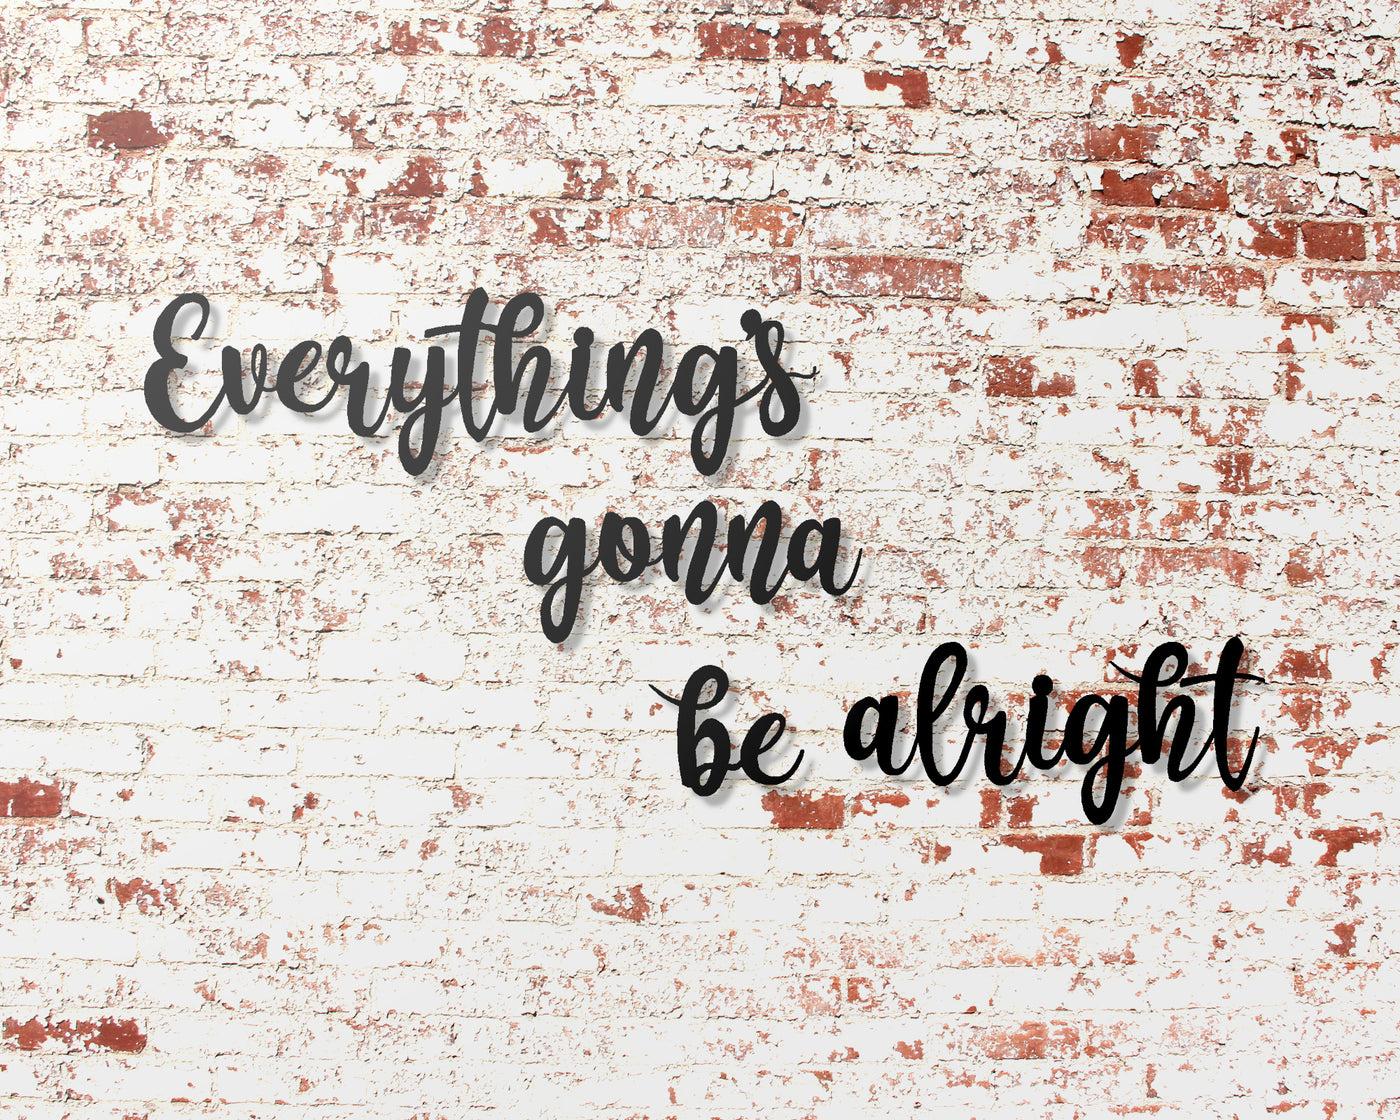 Everything's gonna be alright Metal Word Sign - Madison Iron and Wood - Metal Word Art - metal outdoor decor - Steel deocrations - american made products - veteran owned business products - fencing decorations - fencing supplies - custom wall decorations - personalized wall signs - steel - decorative post caps - steel post caps - metal post caps - brackets - structural brackets - home improvement - easter - easter decorations - easter gift - easter yard decor